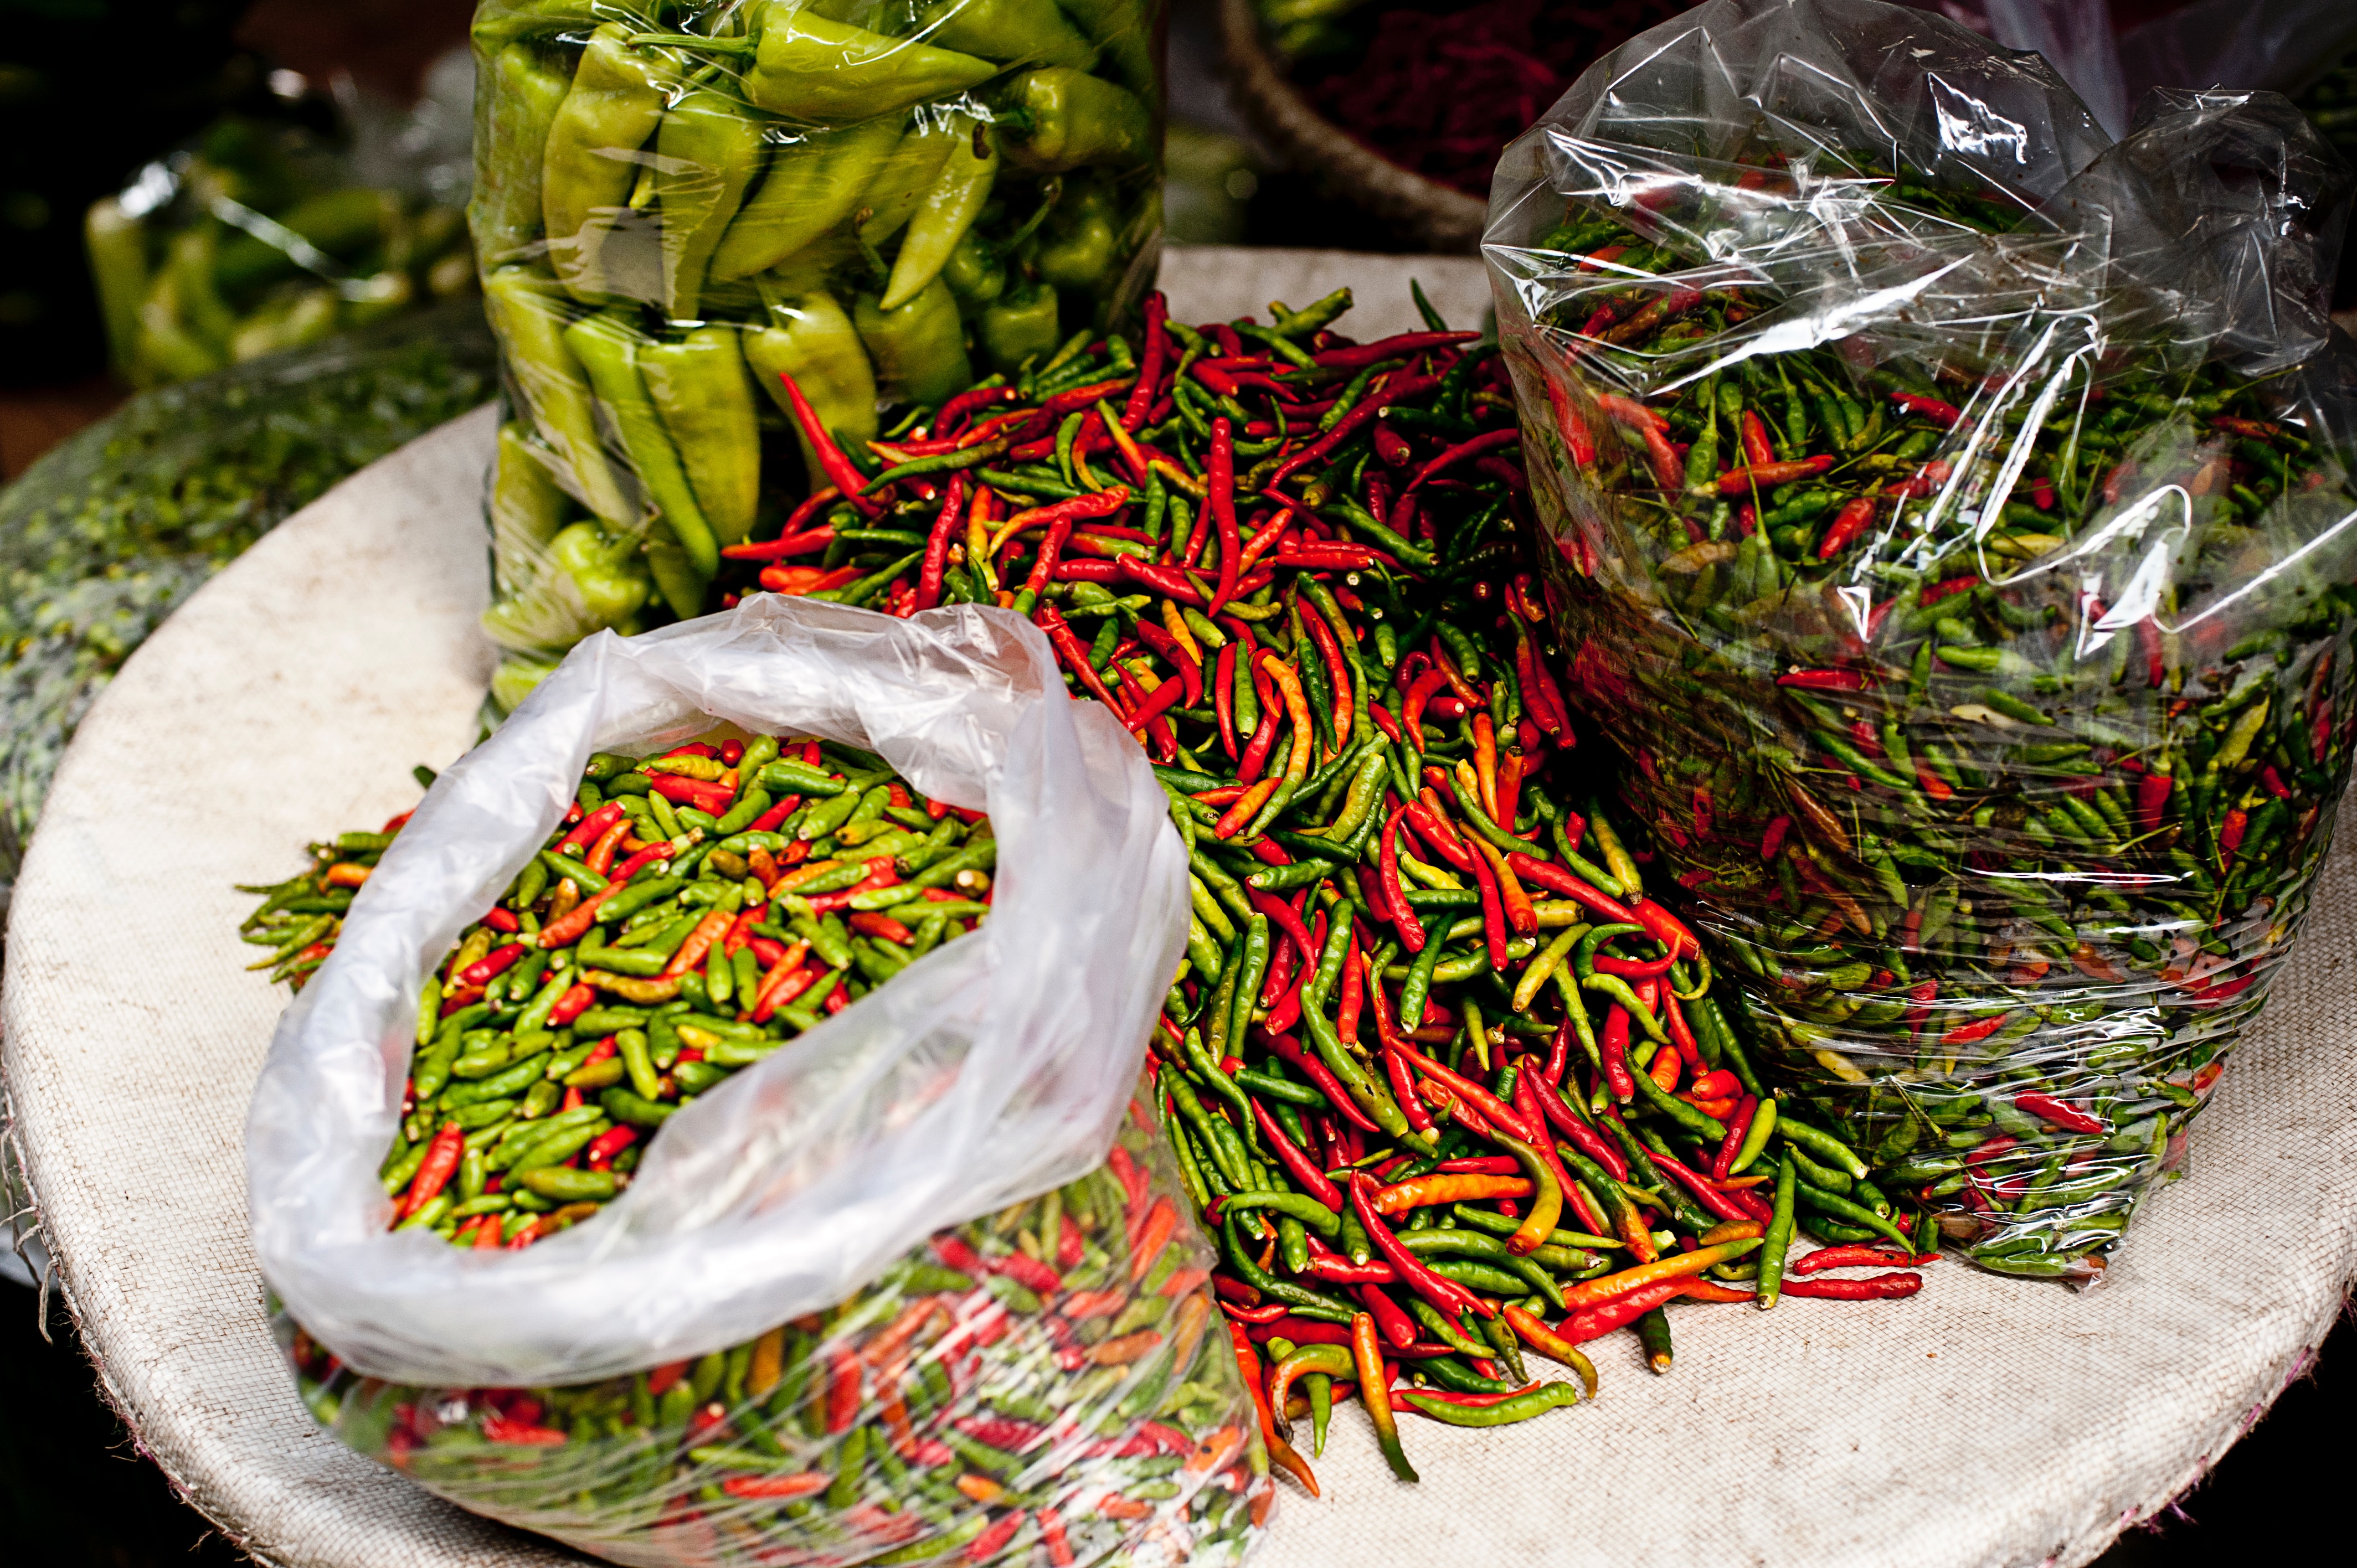 bags of red and green chili peppers - a common ingredient in most isaan food dishes